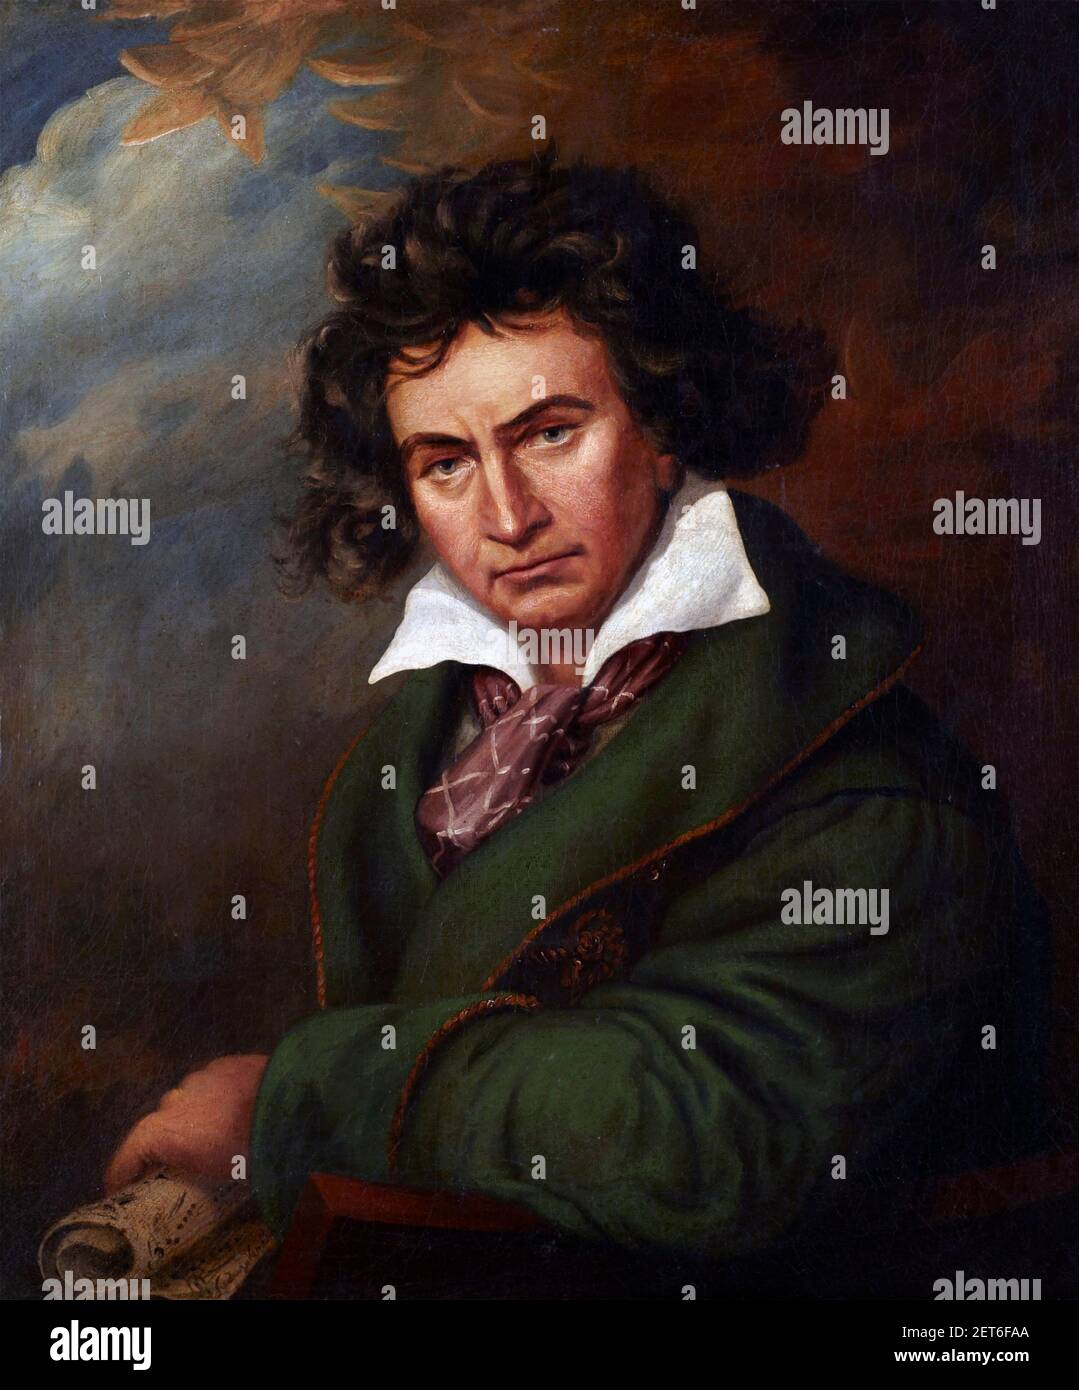 Beethoven; Portrait of the German composer, Ludwig van Beethoven (1770-1827) painting in the style of Joseph Karl Stieler, after 1819 Stock Photo